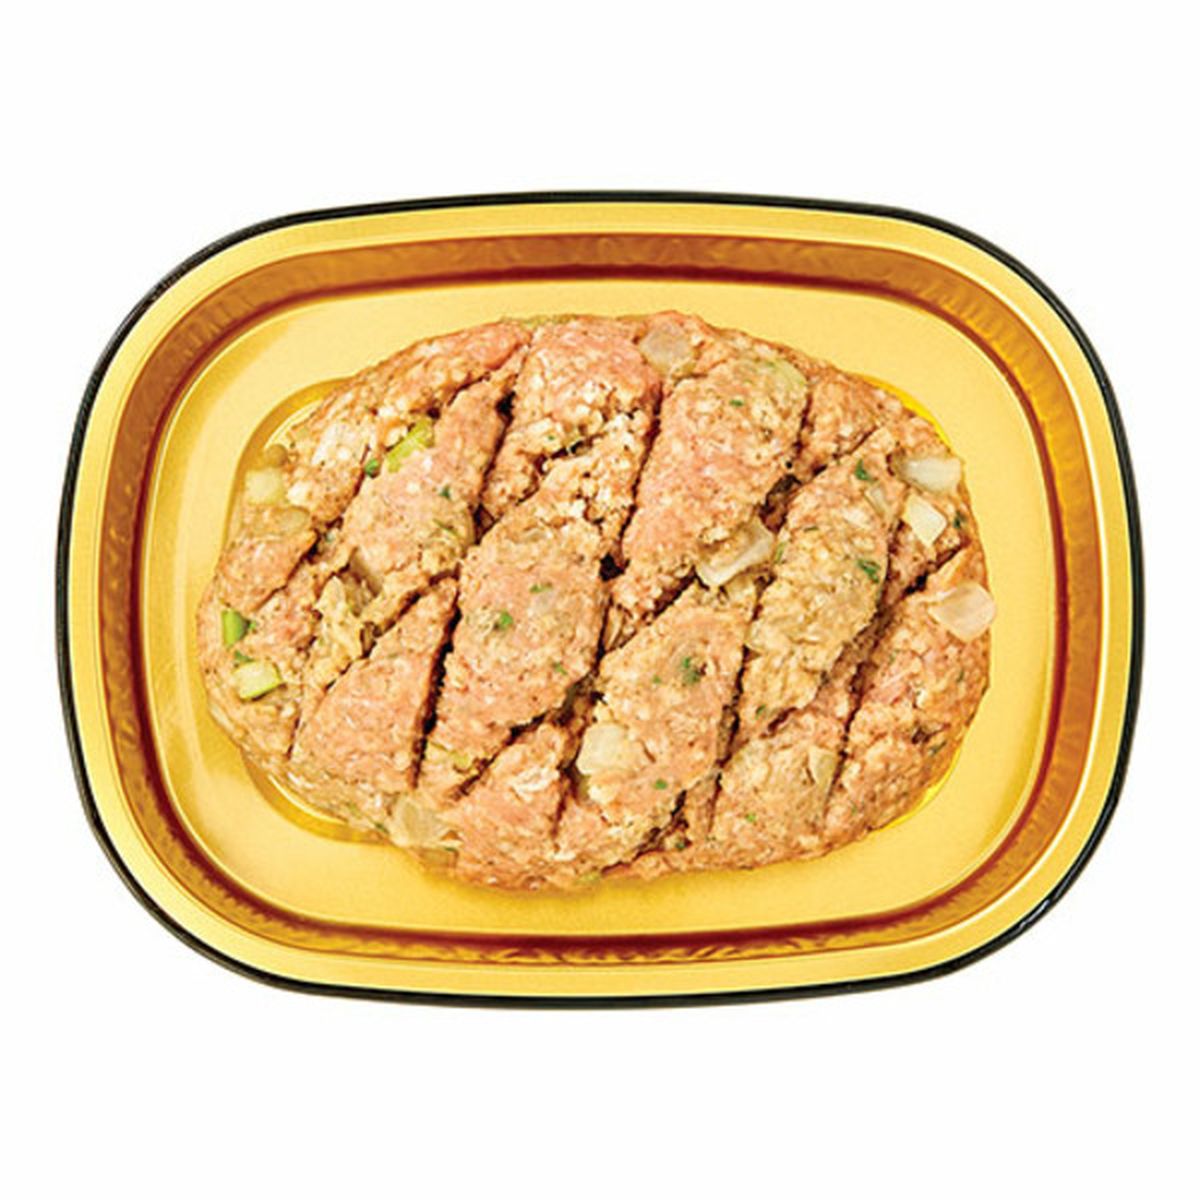 Calories in Wegmans Ready To Cook Turkey Sage Meatloaf, Small